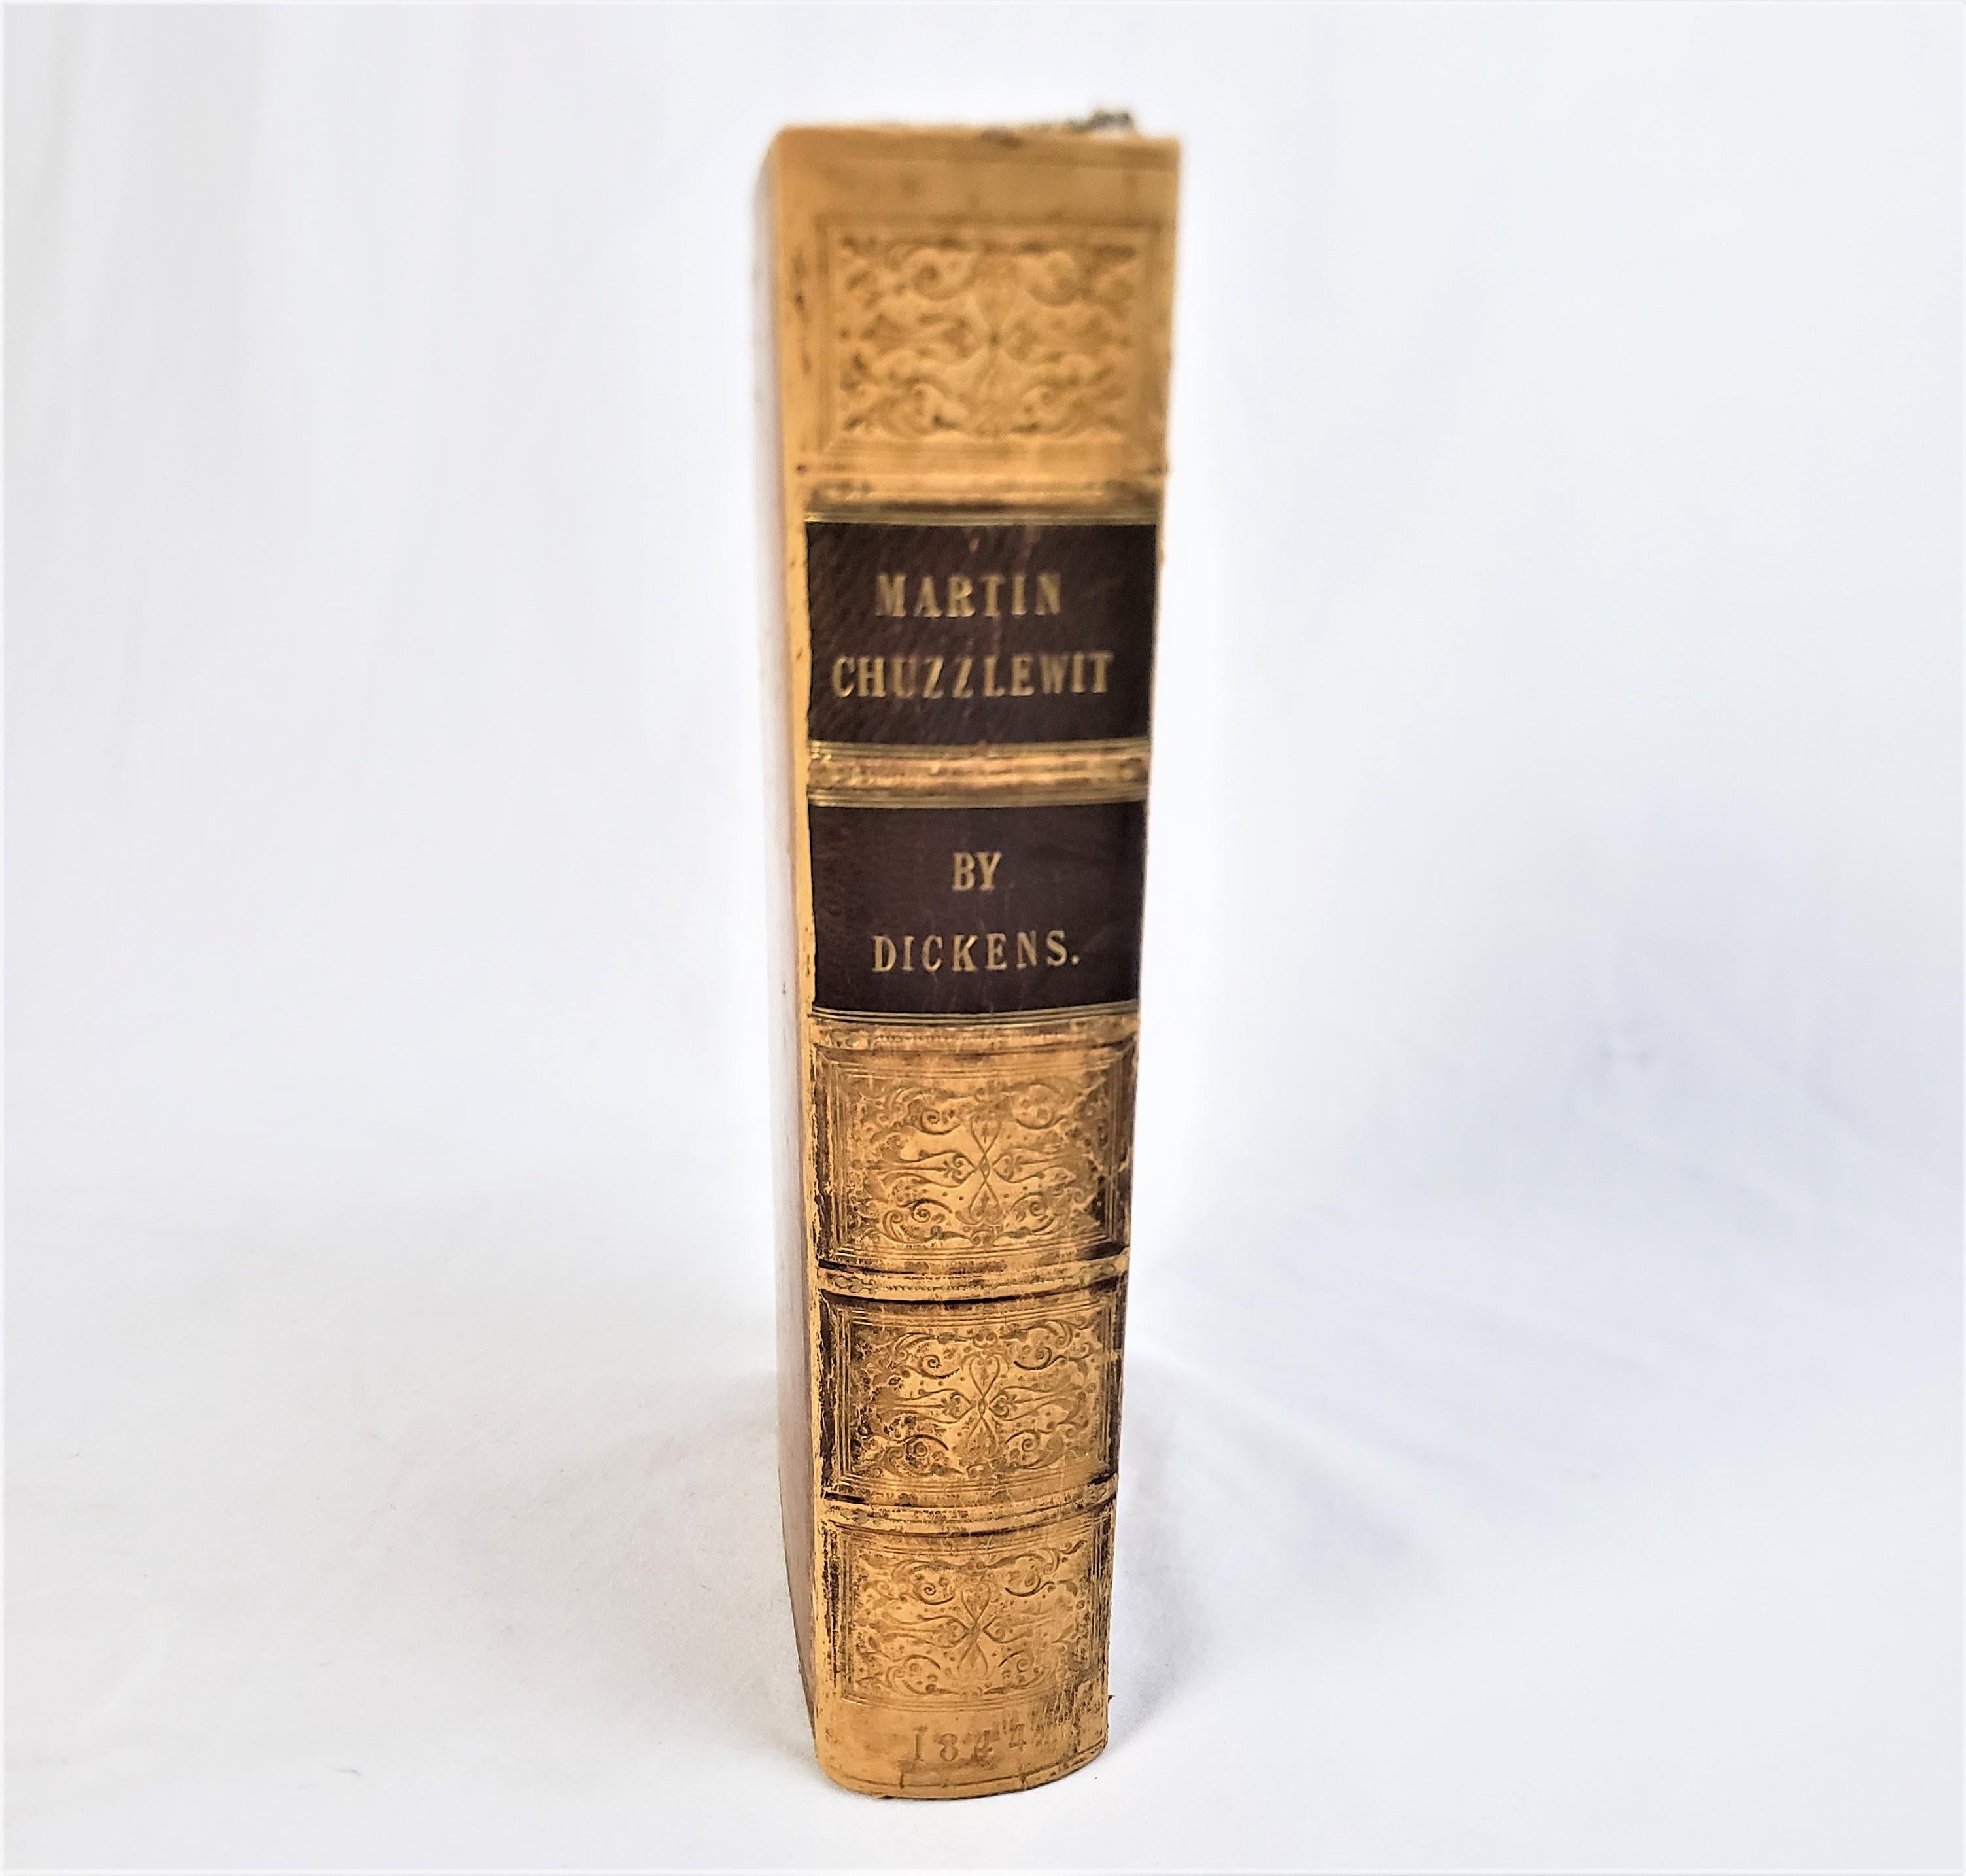 This antique 1st Edition book titled Martin Chuzzlewit was authored by Charles Dickens and published by Chapman and Hall of England in 1844 in the period Victorian style with 40 full page etchings by Hablot Knight Browne 